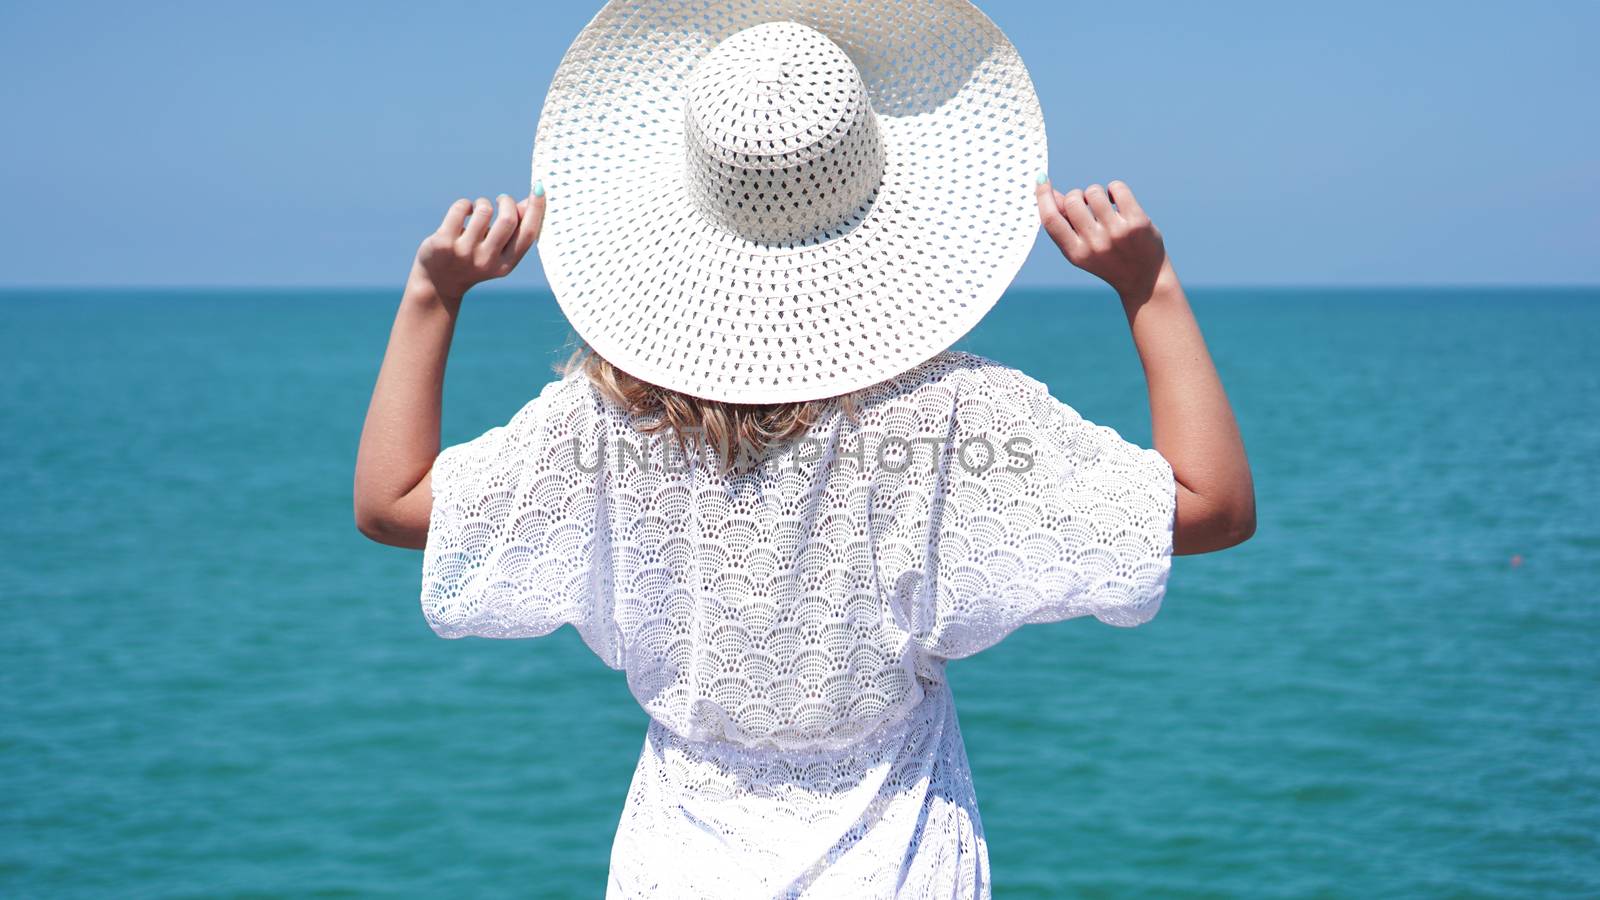 Young woman standing on sand near sea and holding a white hat